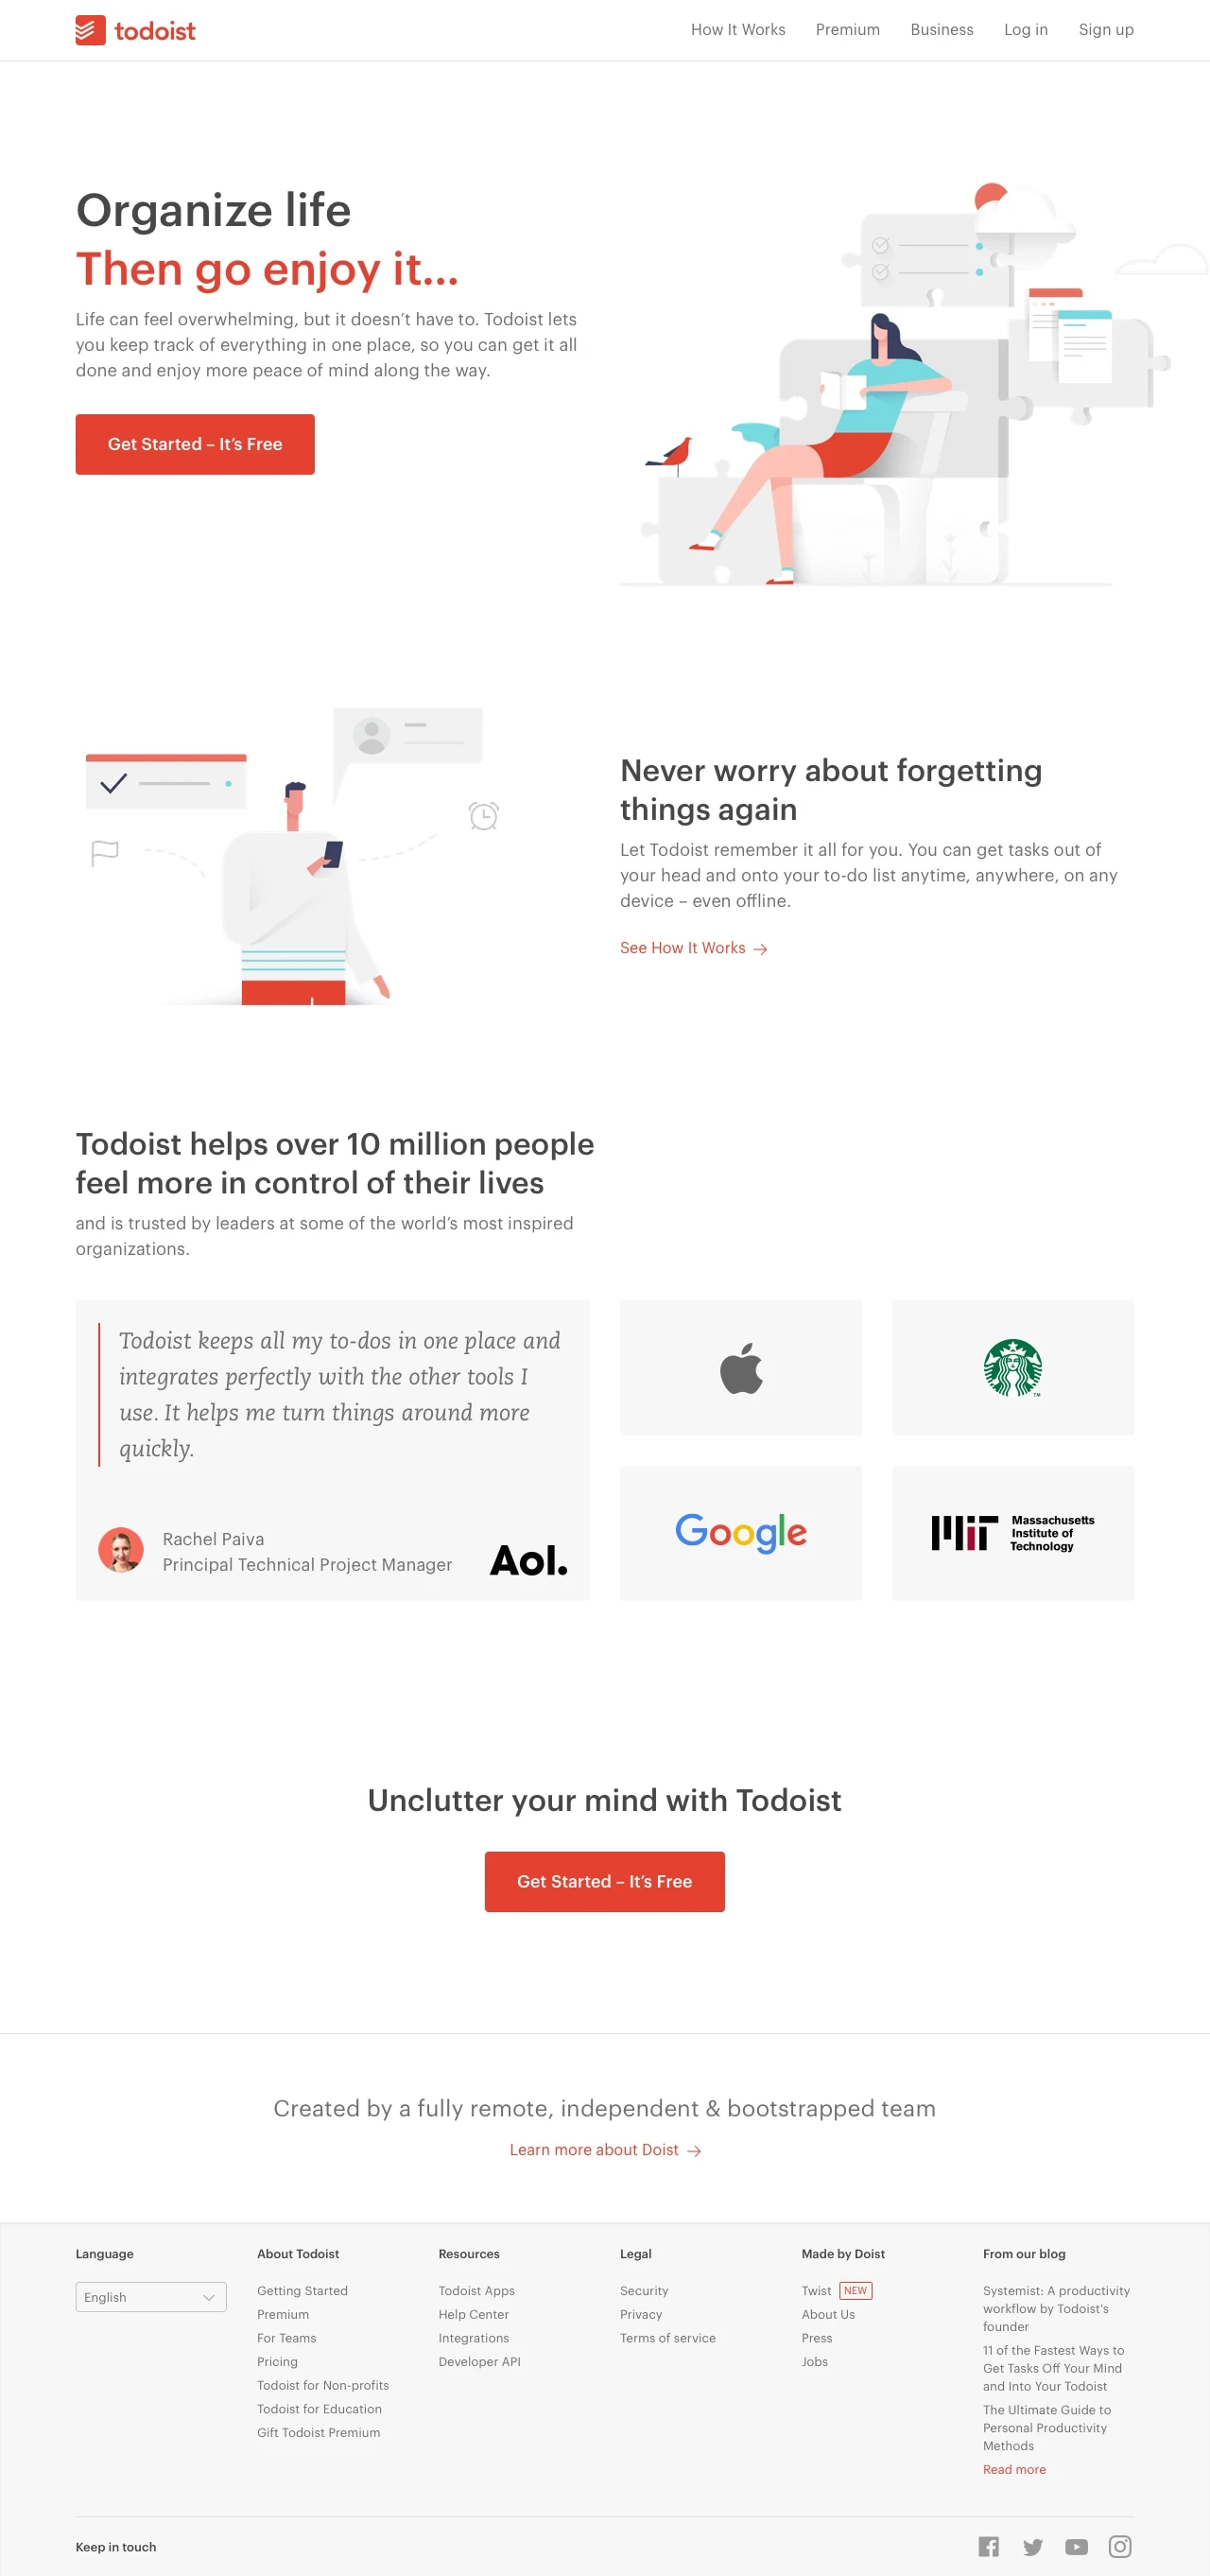 Todoist Landing Page Example: Trusted by over 13 million people to tame life’s chaos. Ranked by The Verge as the world’s best to-do list app. Free on iOS, Android, Mac, Windows, and more...